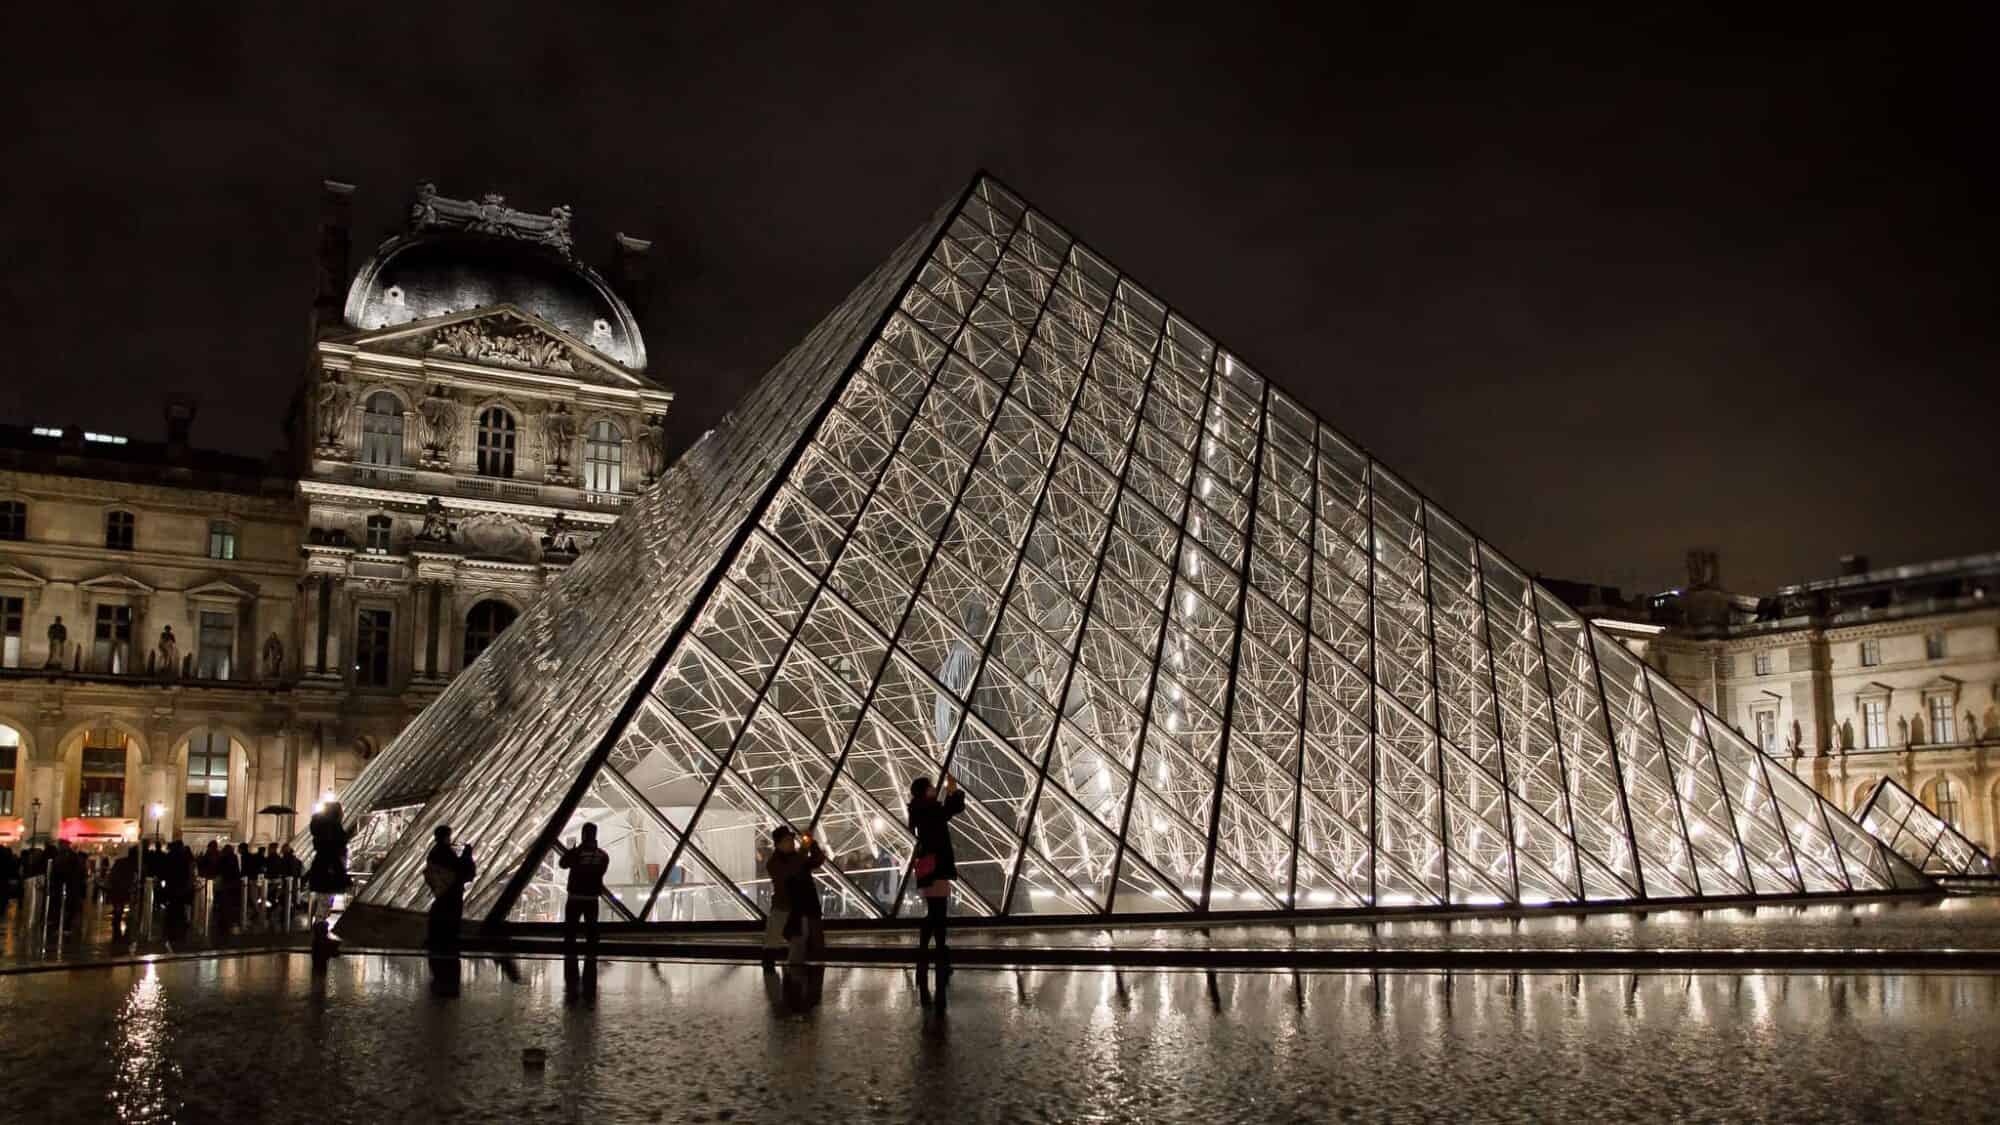 The glass pyramid of the Louvre Museum lit up at night with a few people walking next to it on the left.